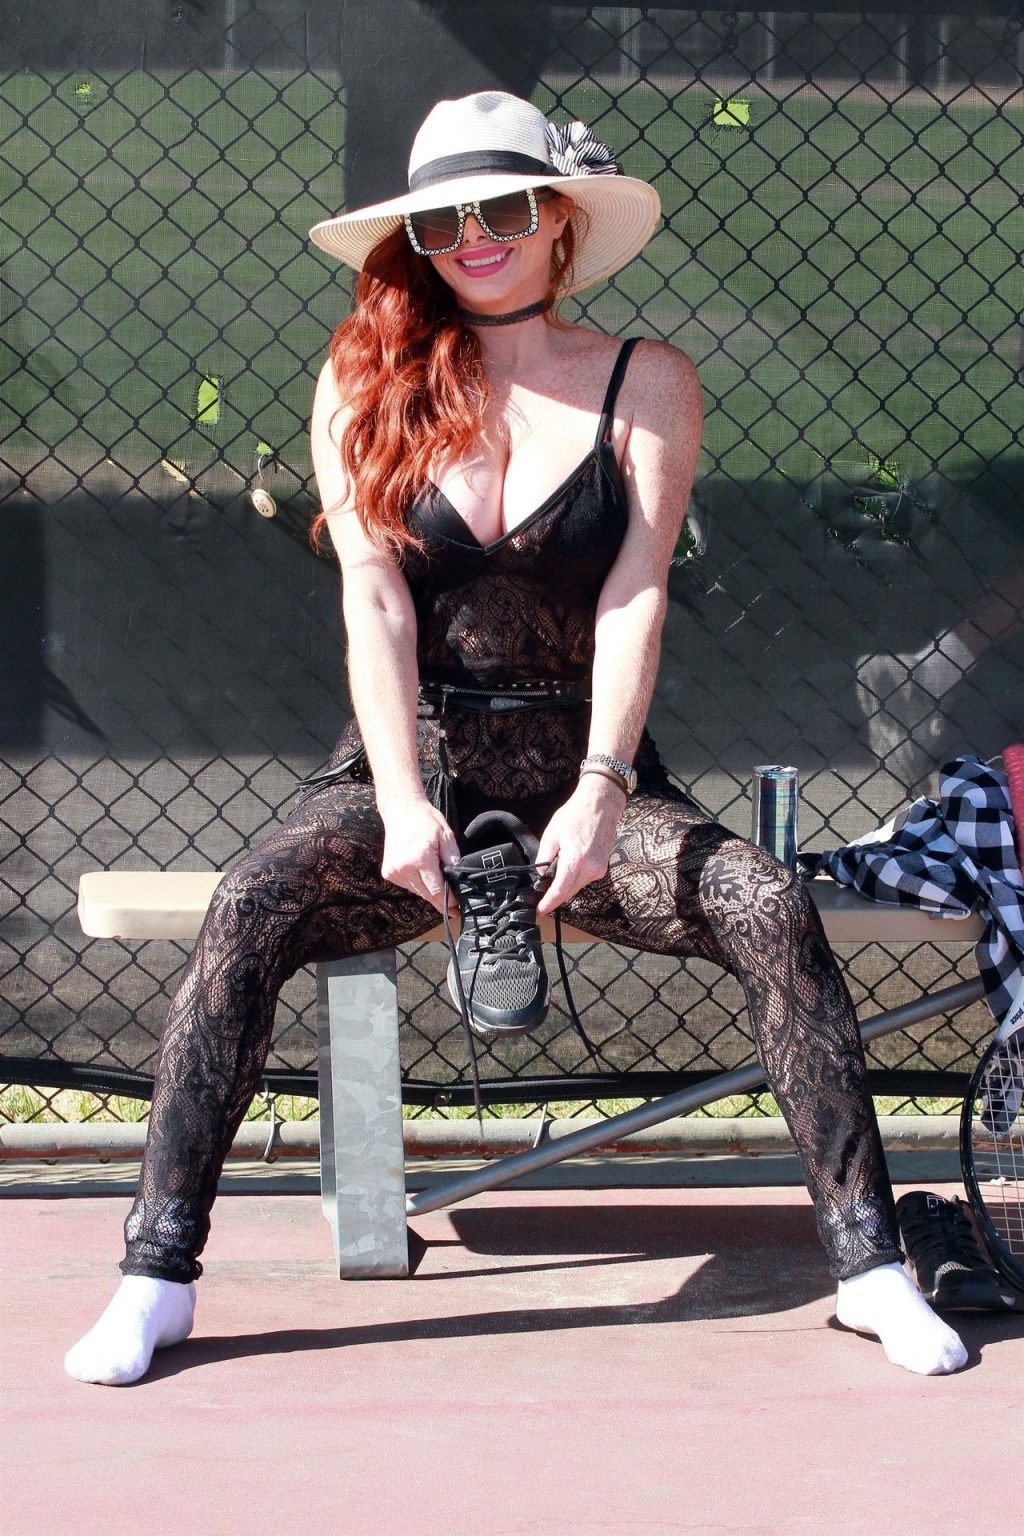 Phoebe Price Goes Racy Lacy on the Tennis Court (34 Photos)